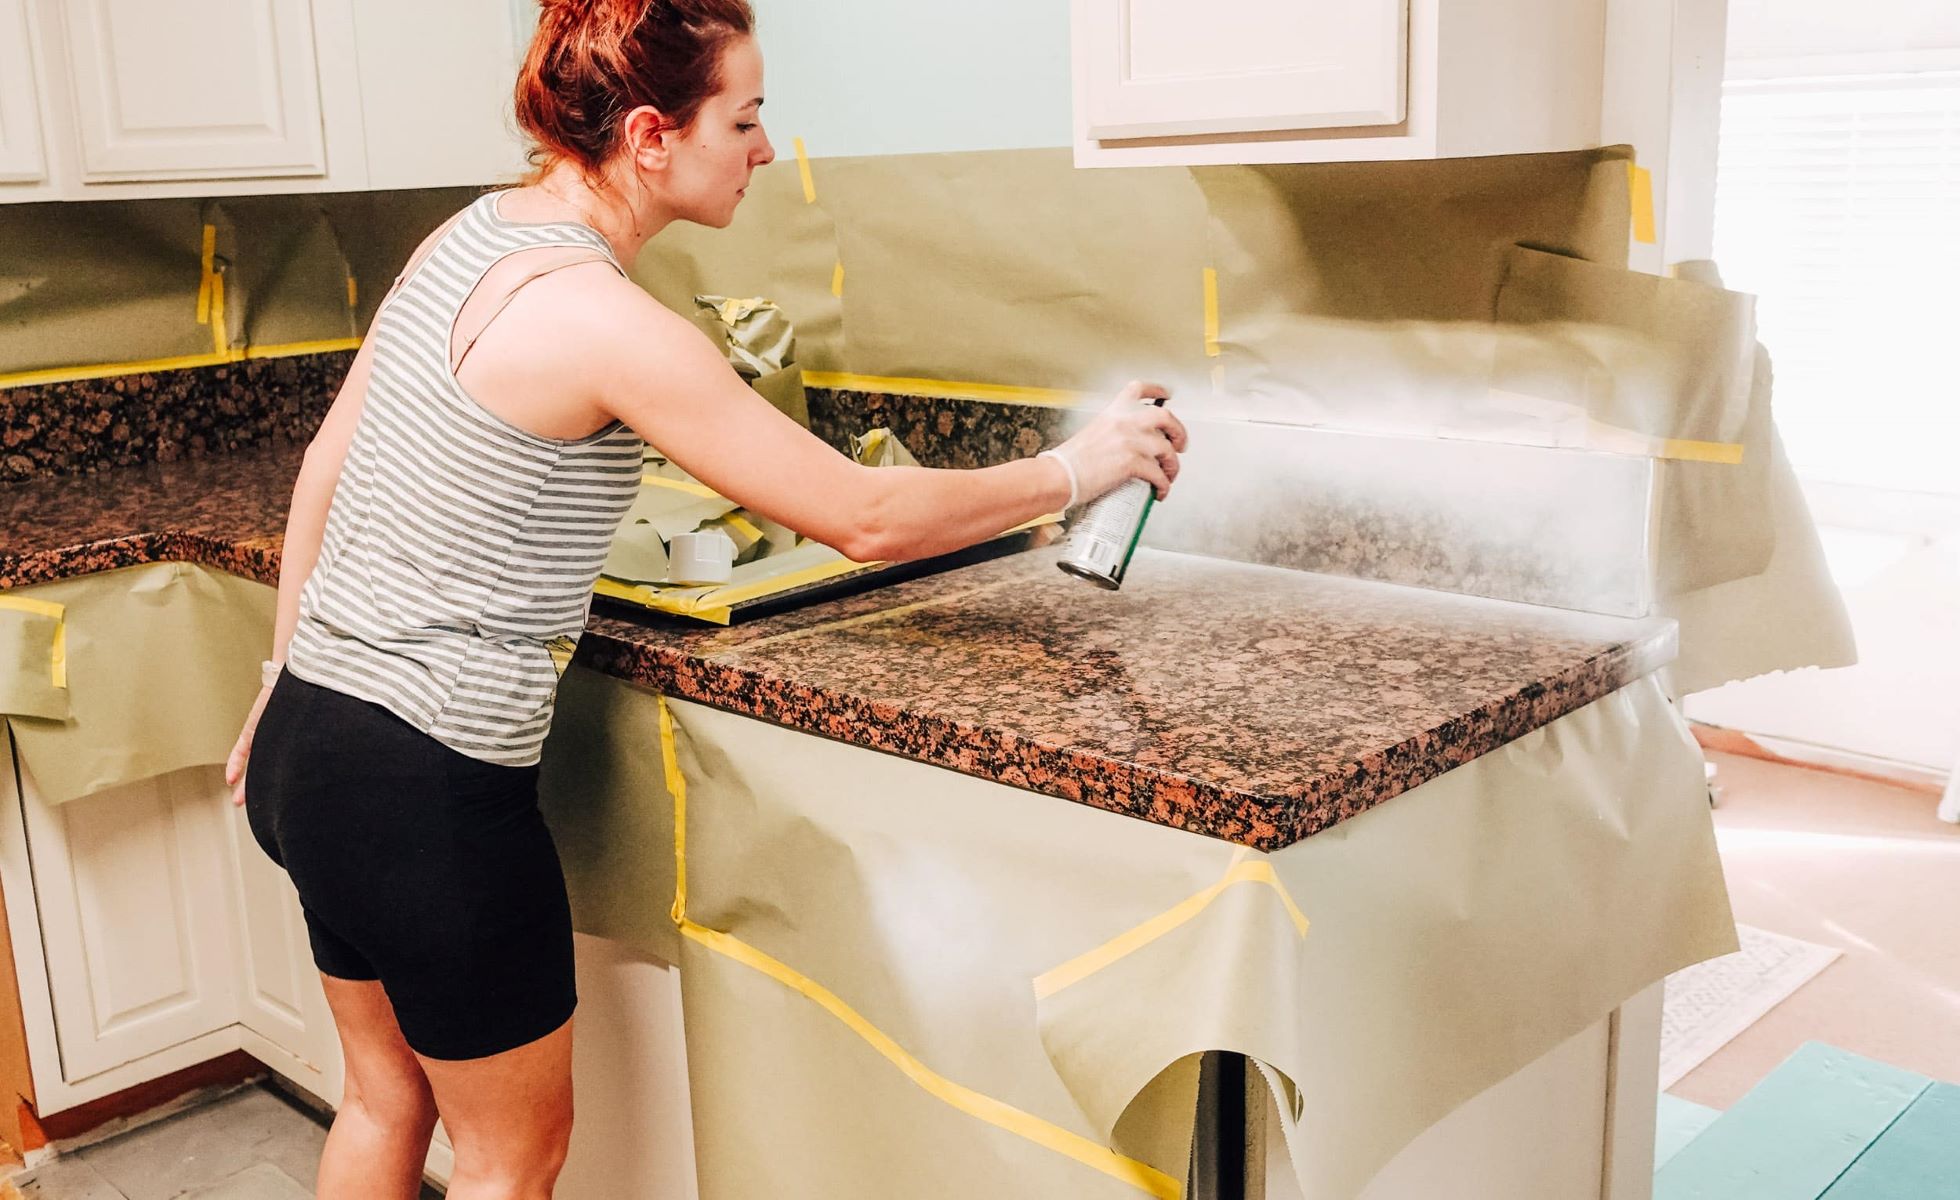 How To Paint Countertops To Look Like Granite